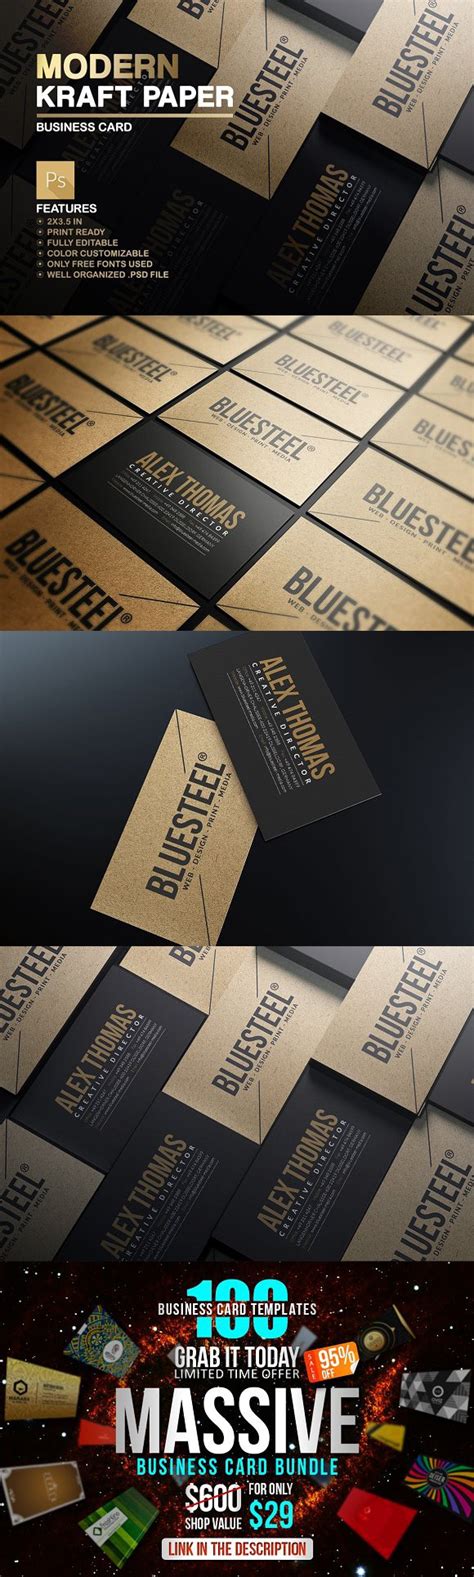 Modern Kraft Paper Business Card Business Cards Creative Cleaning